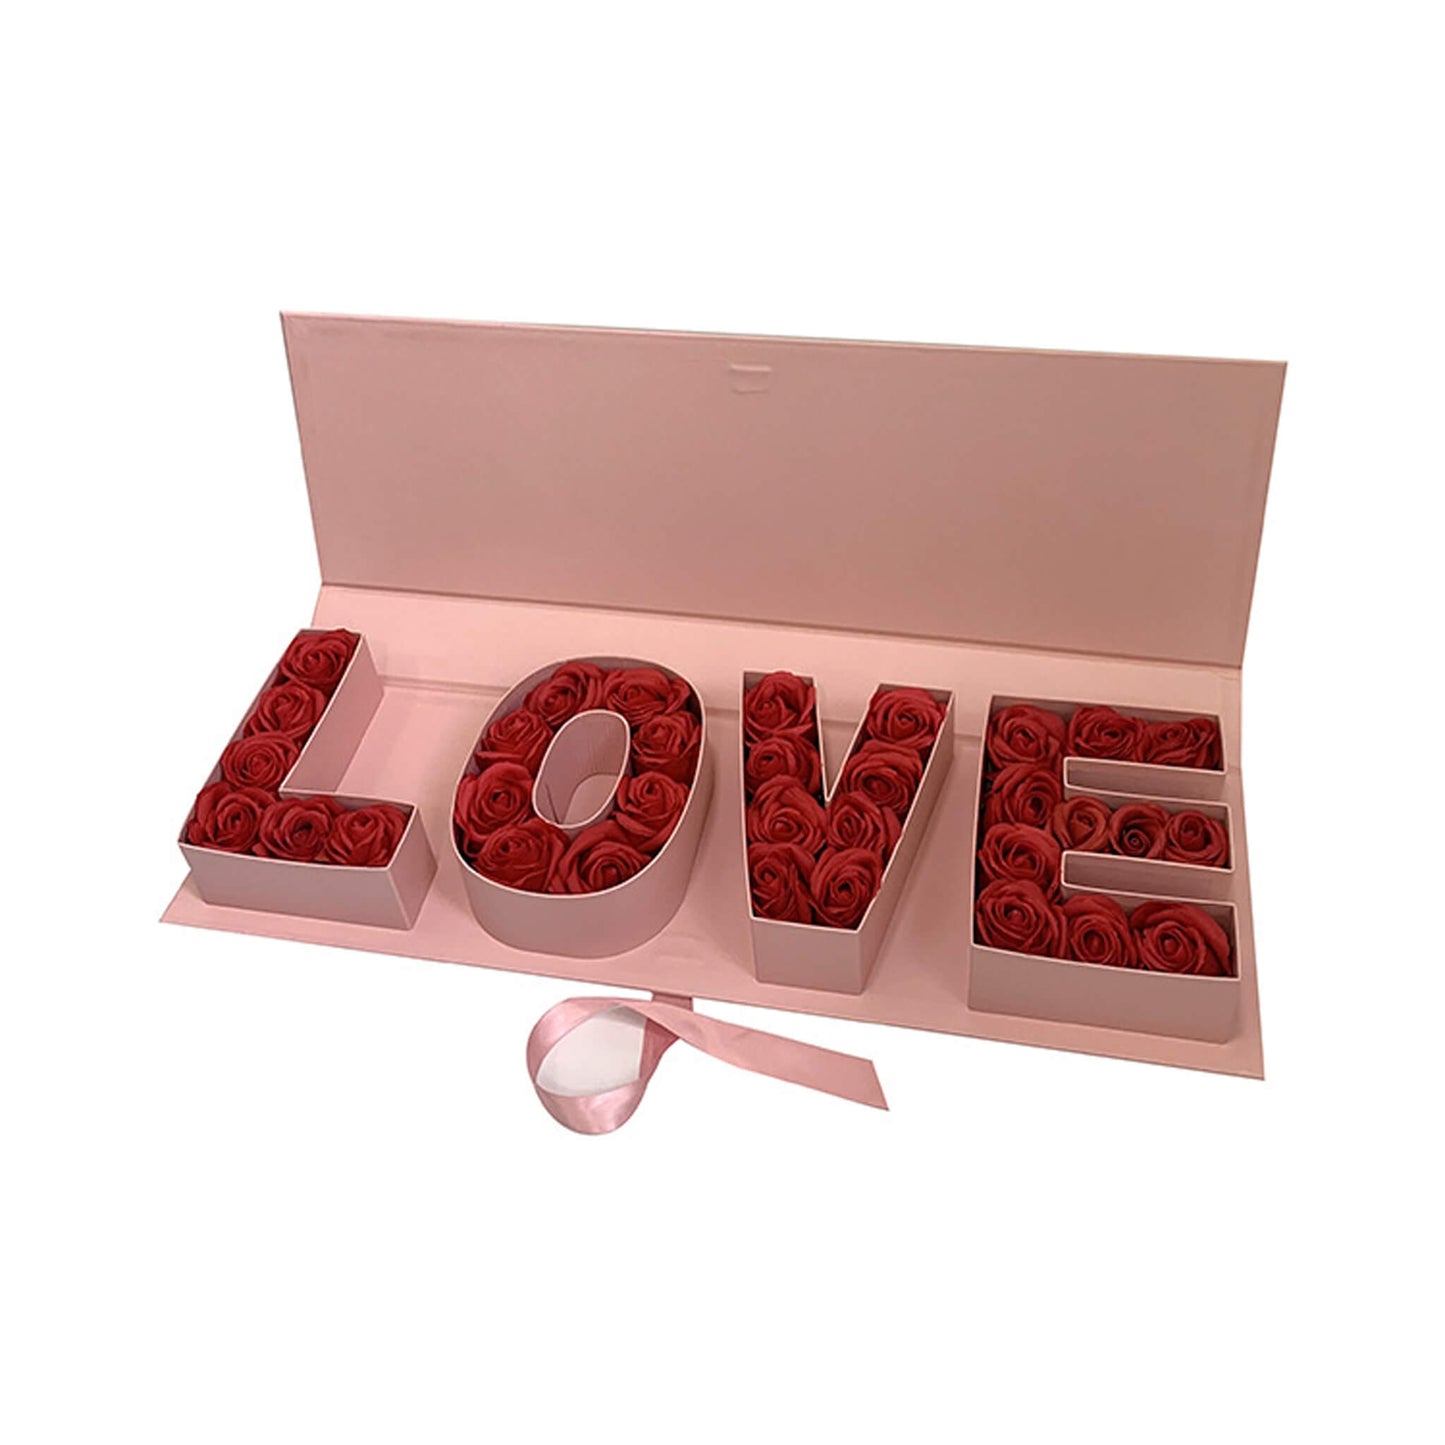 I love you rose gift box for Mother's day - Bulk Lots